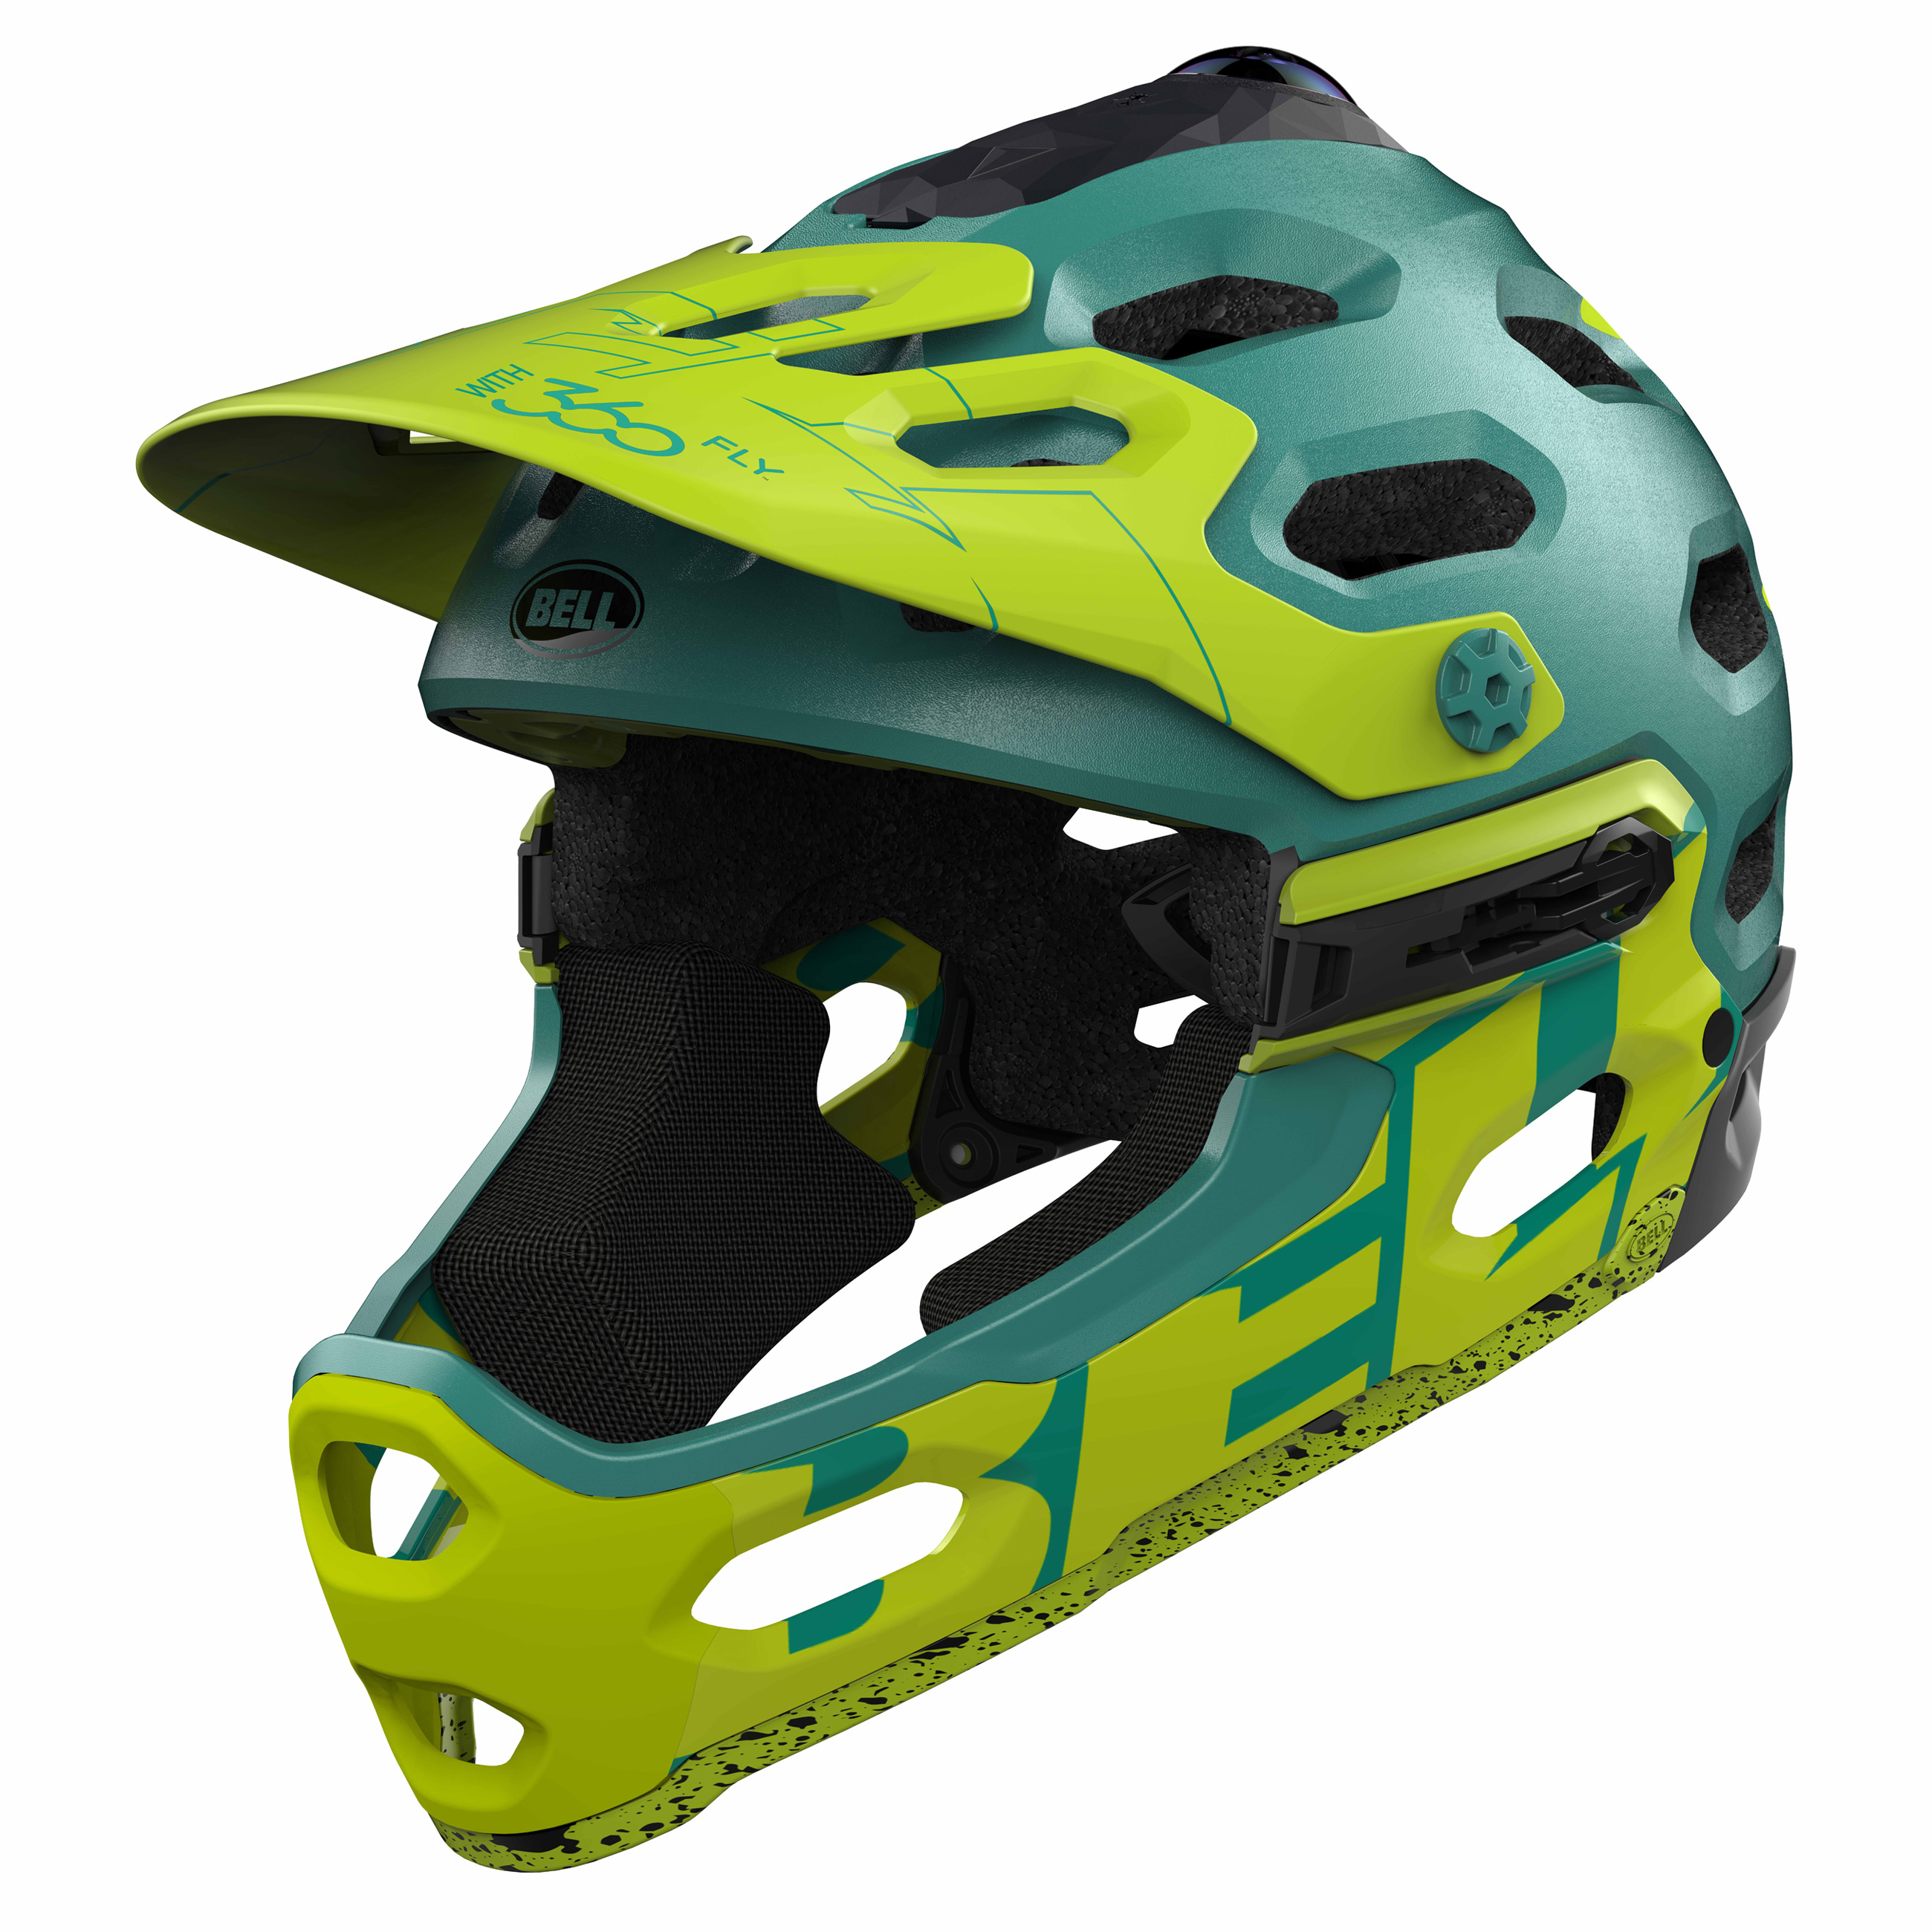 Bell integrated 360fly gets the wide view with fully panoramic helmet ...